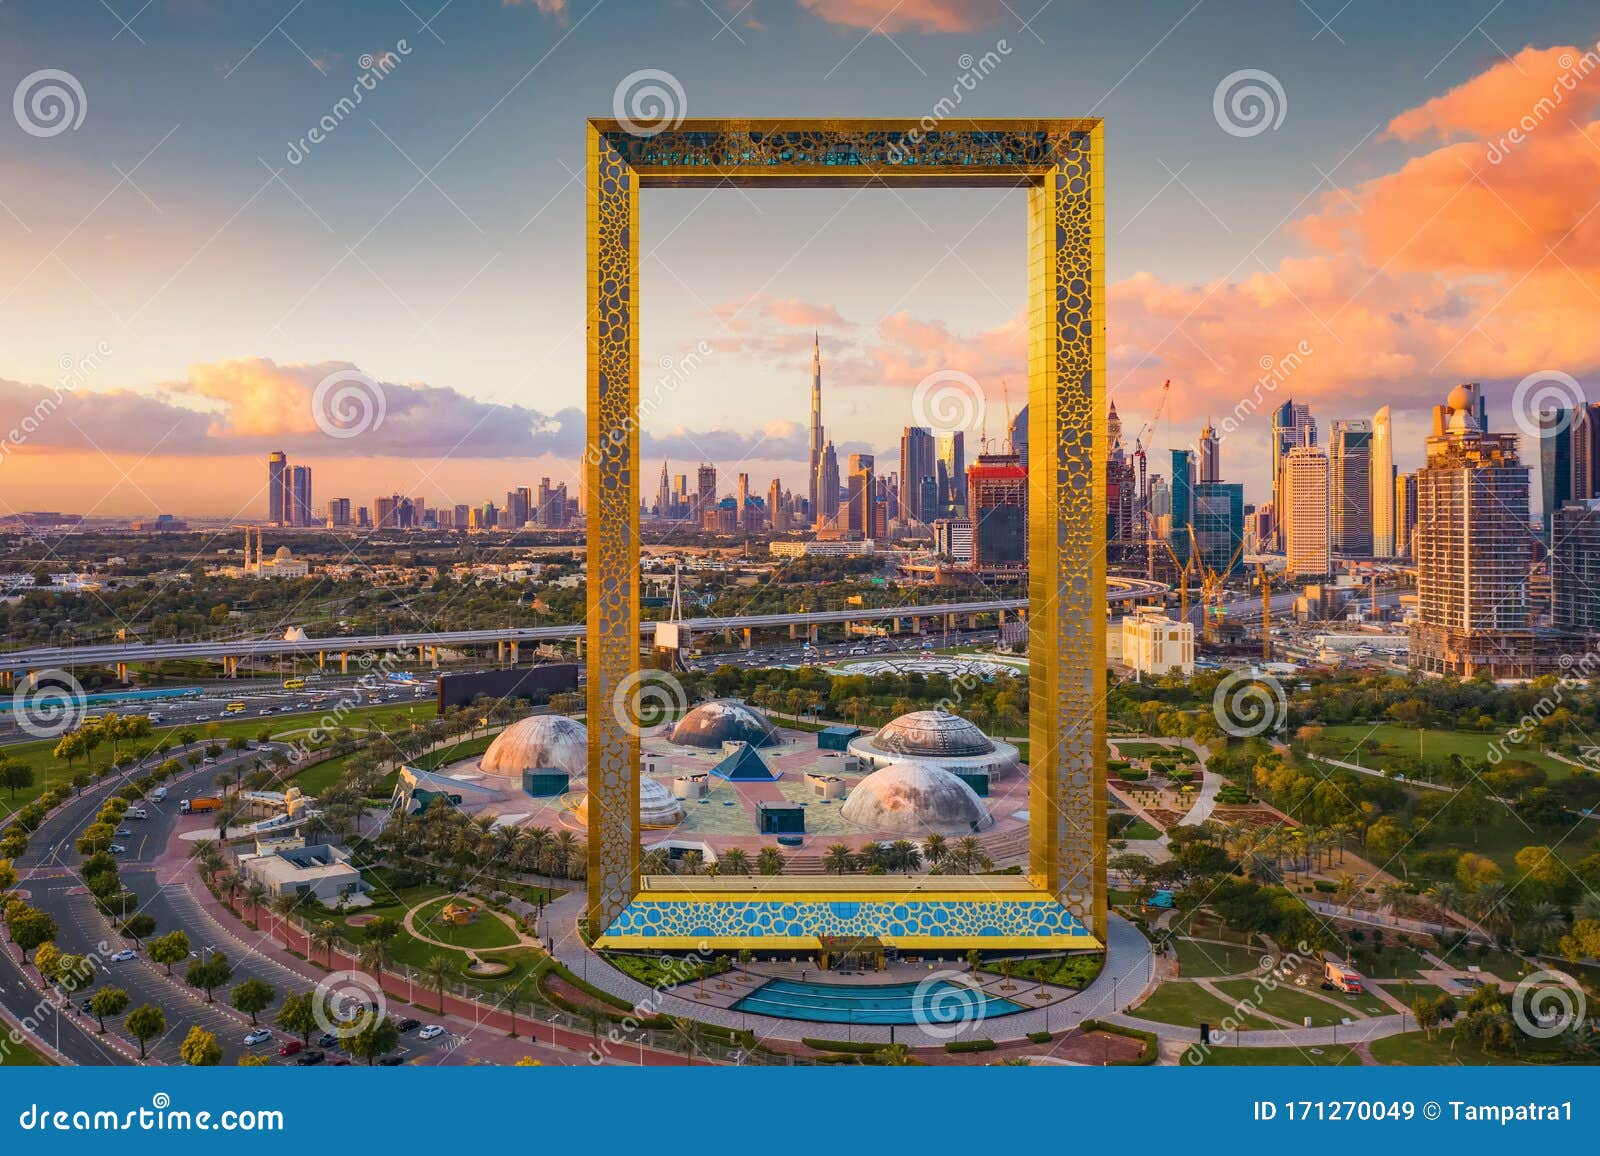 aerial view of dubai frame, downtown skyline, united arab emirates or uae. financial district and business area in smart urban